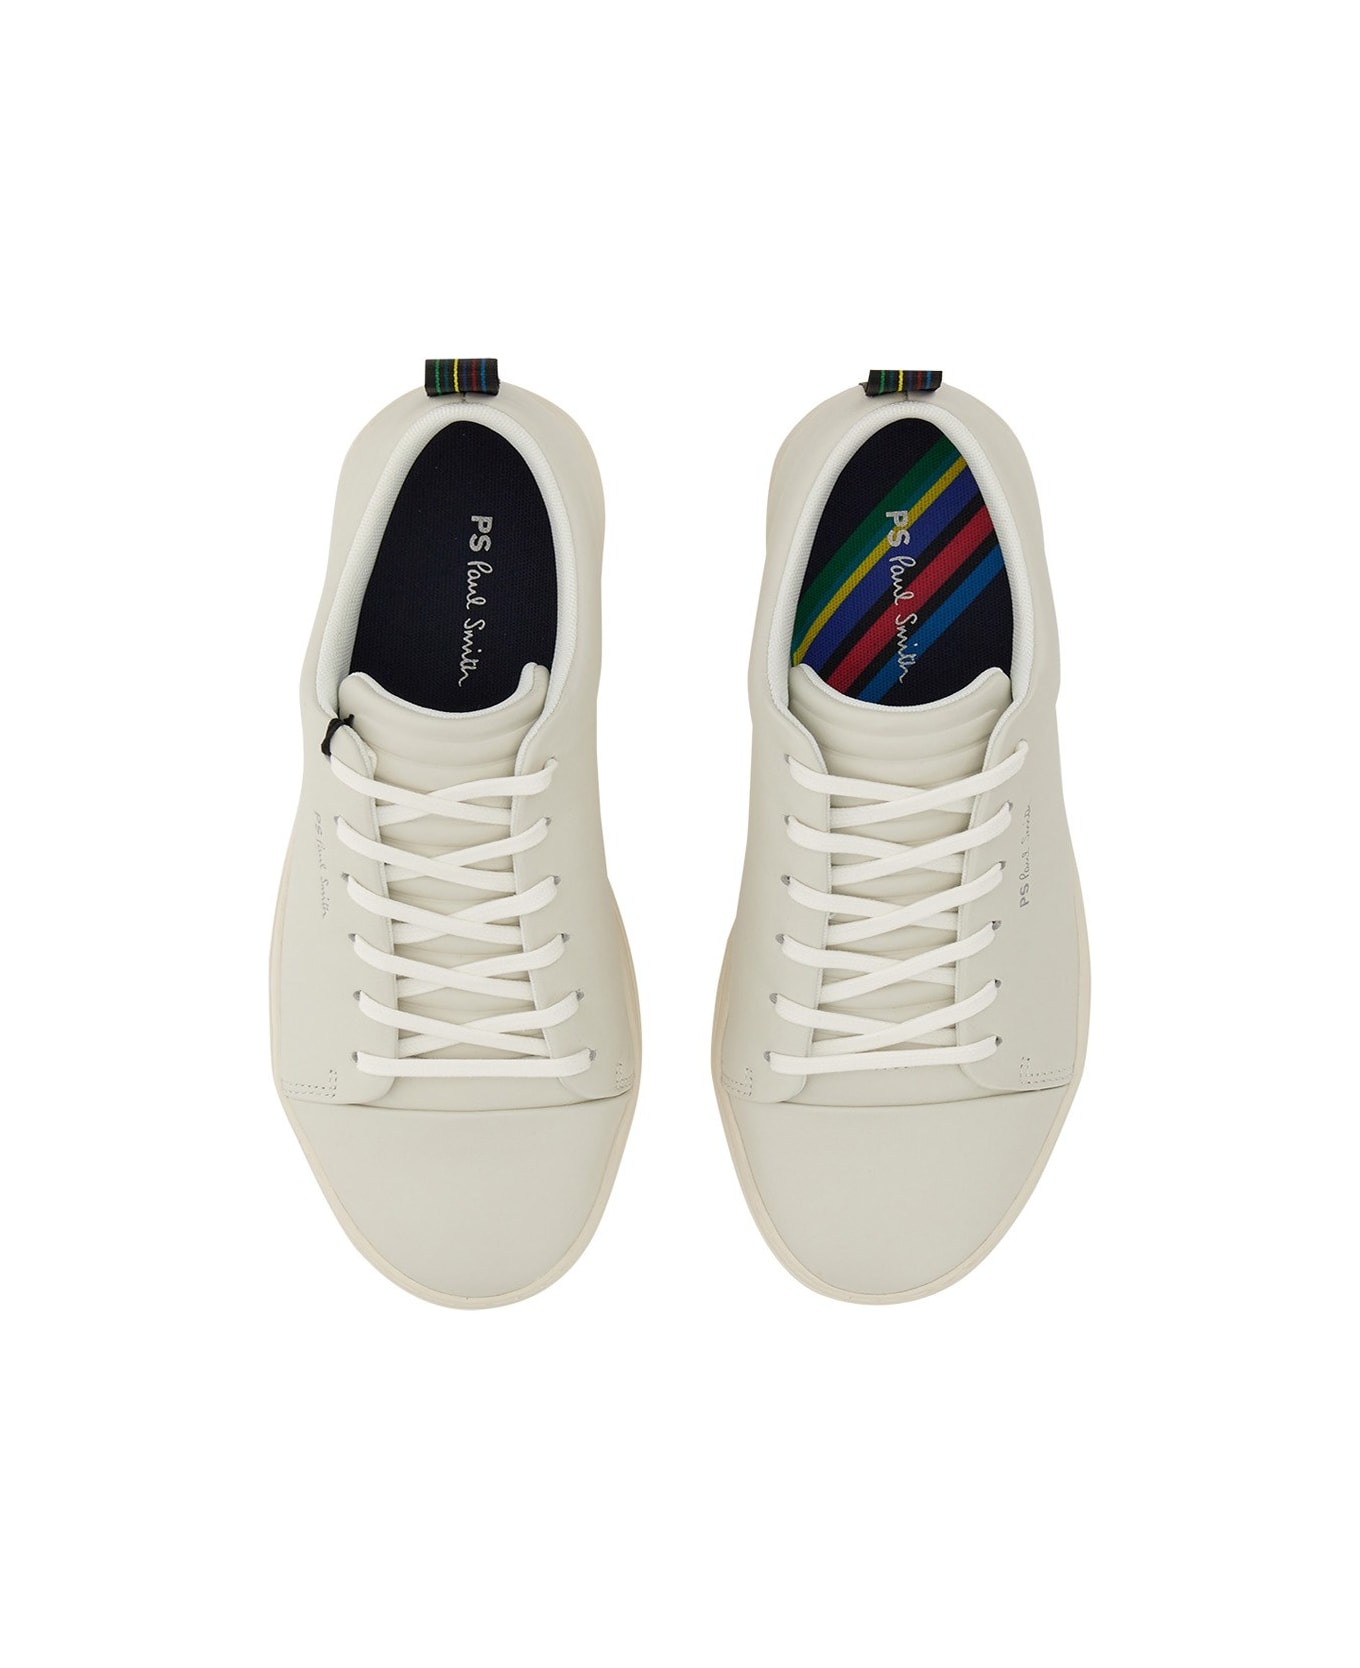 Paul Smith Sneaker With Logo Paul Smith - WHITE スニーカー